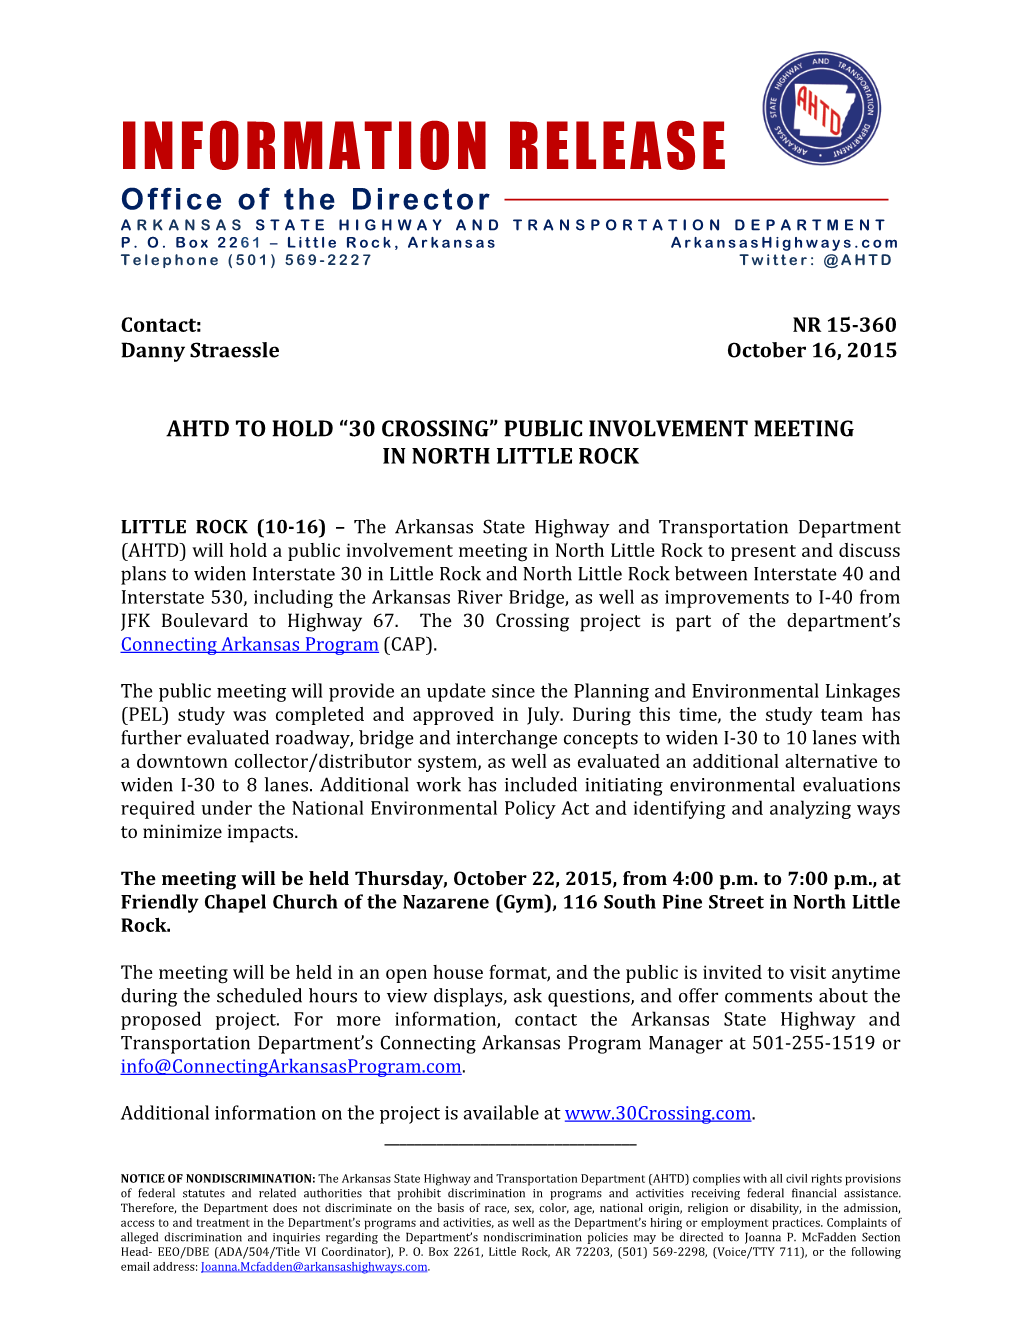 INFORMATION RELEASE Office of the Director a RKANSAS STATE HIGHWAY and TRANSPORTATION DEPARTMENT P